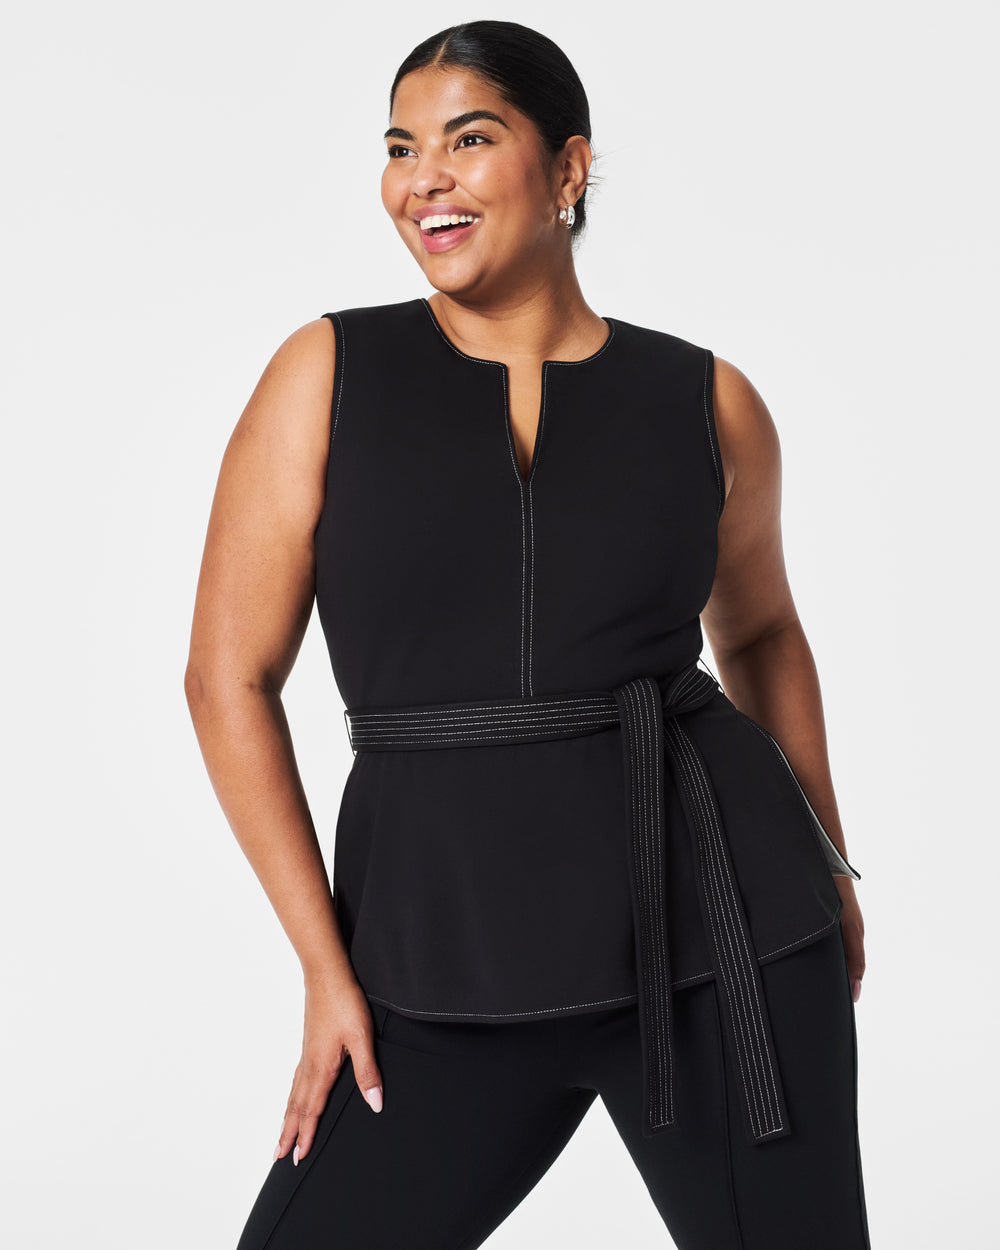 Work Wear fit to Perfection Sizes 10-30. Shop Now to Save Up to 25%!